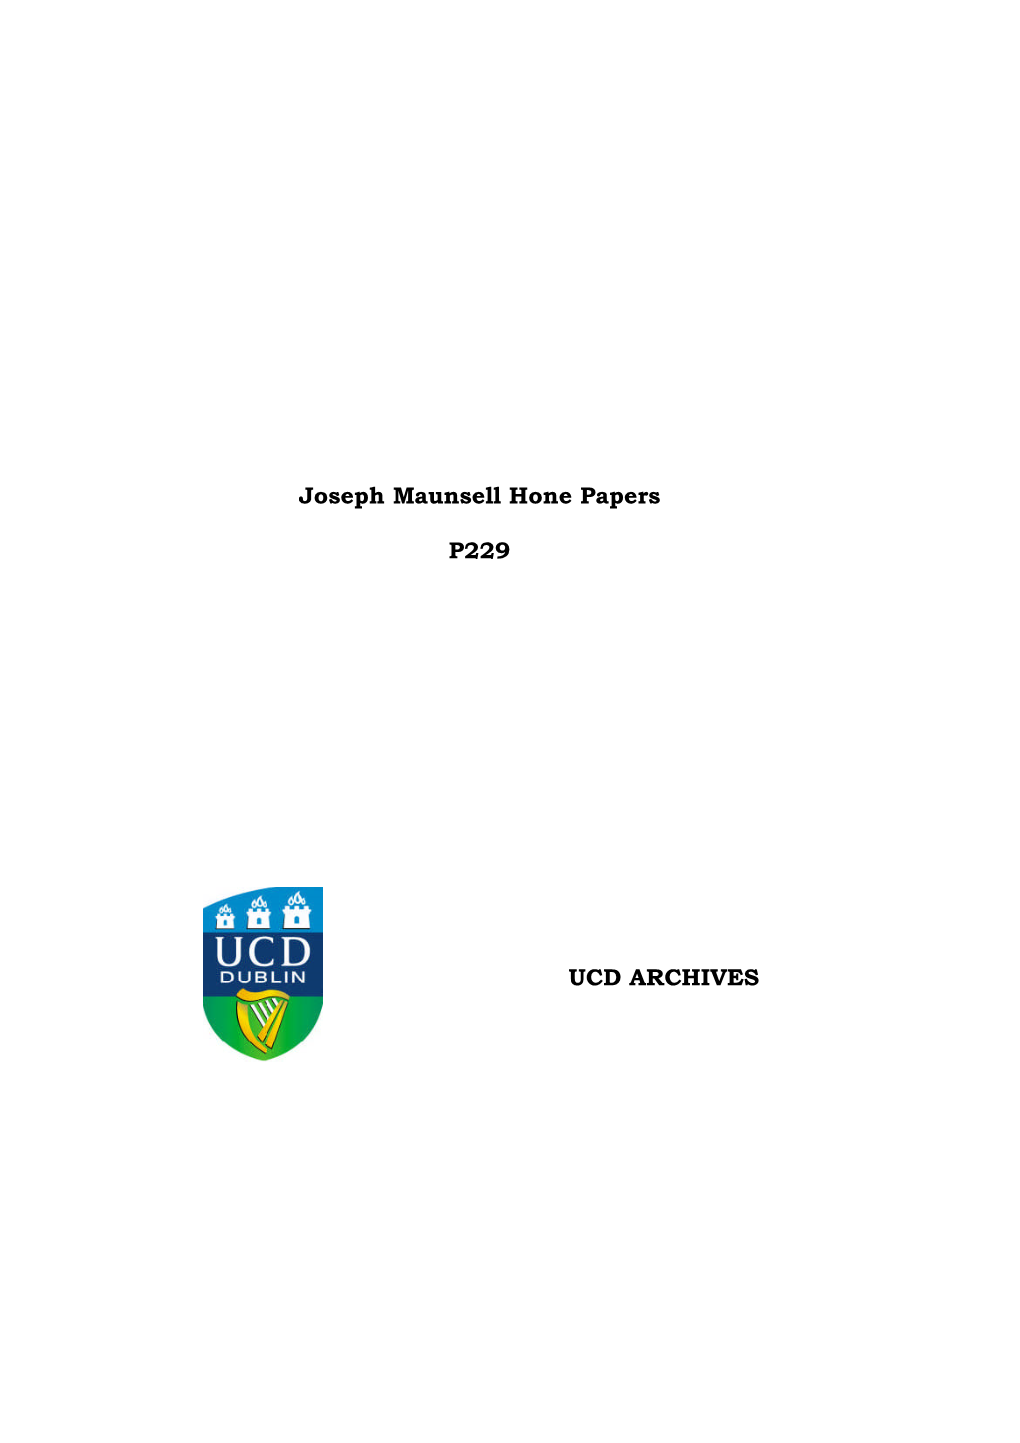 Joseph Maunsell Hone Papers P229 UCD ARCHIVES